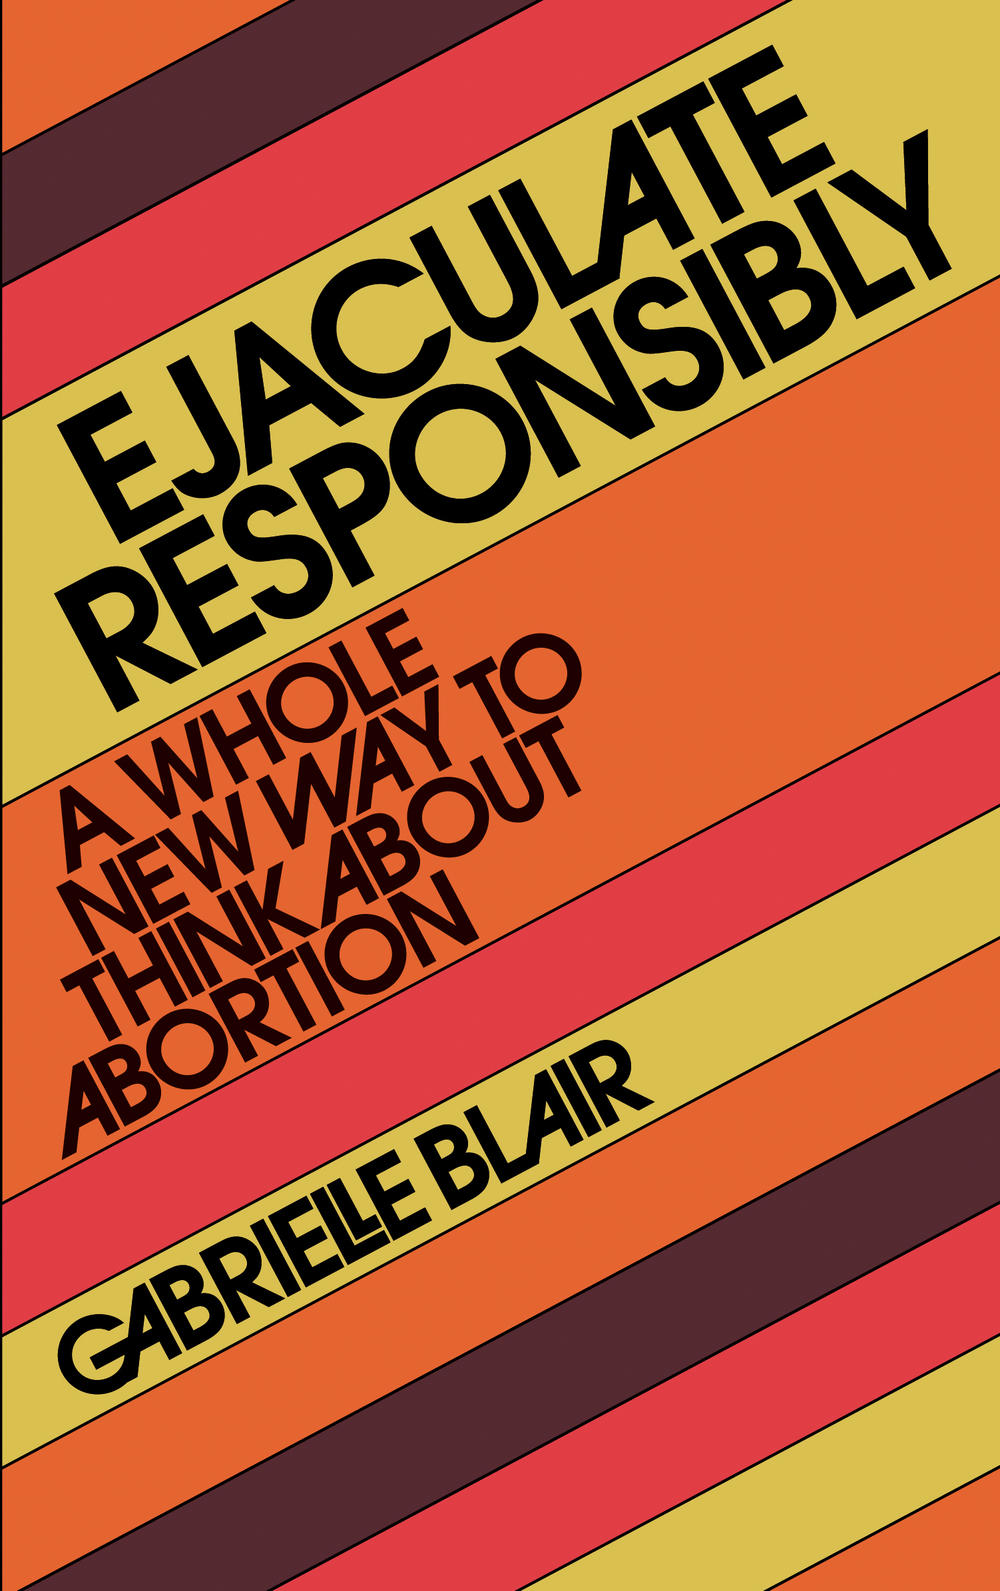 In her new book, writer Gabrielle Blair places the responsibility for abortion squarely on men.